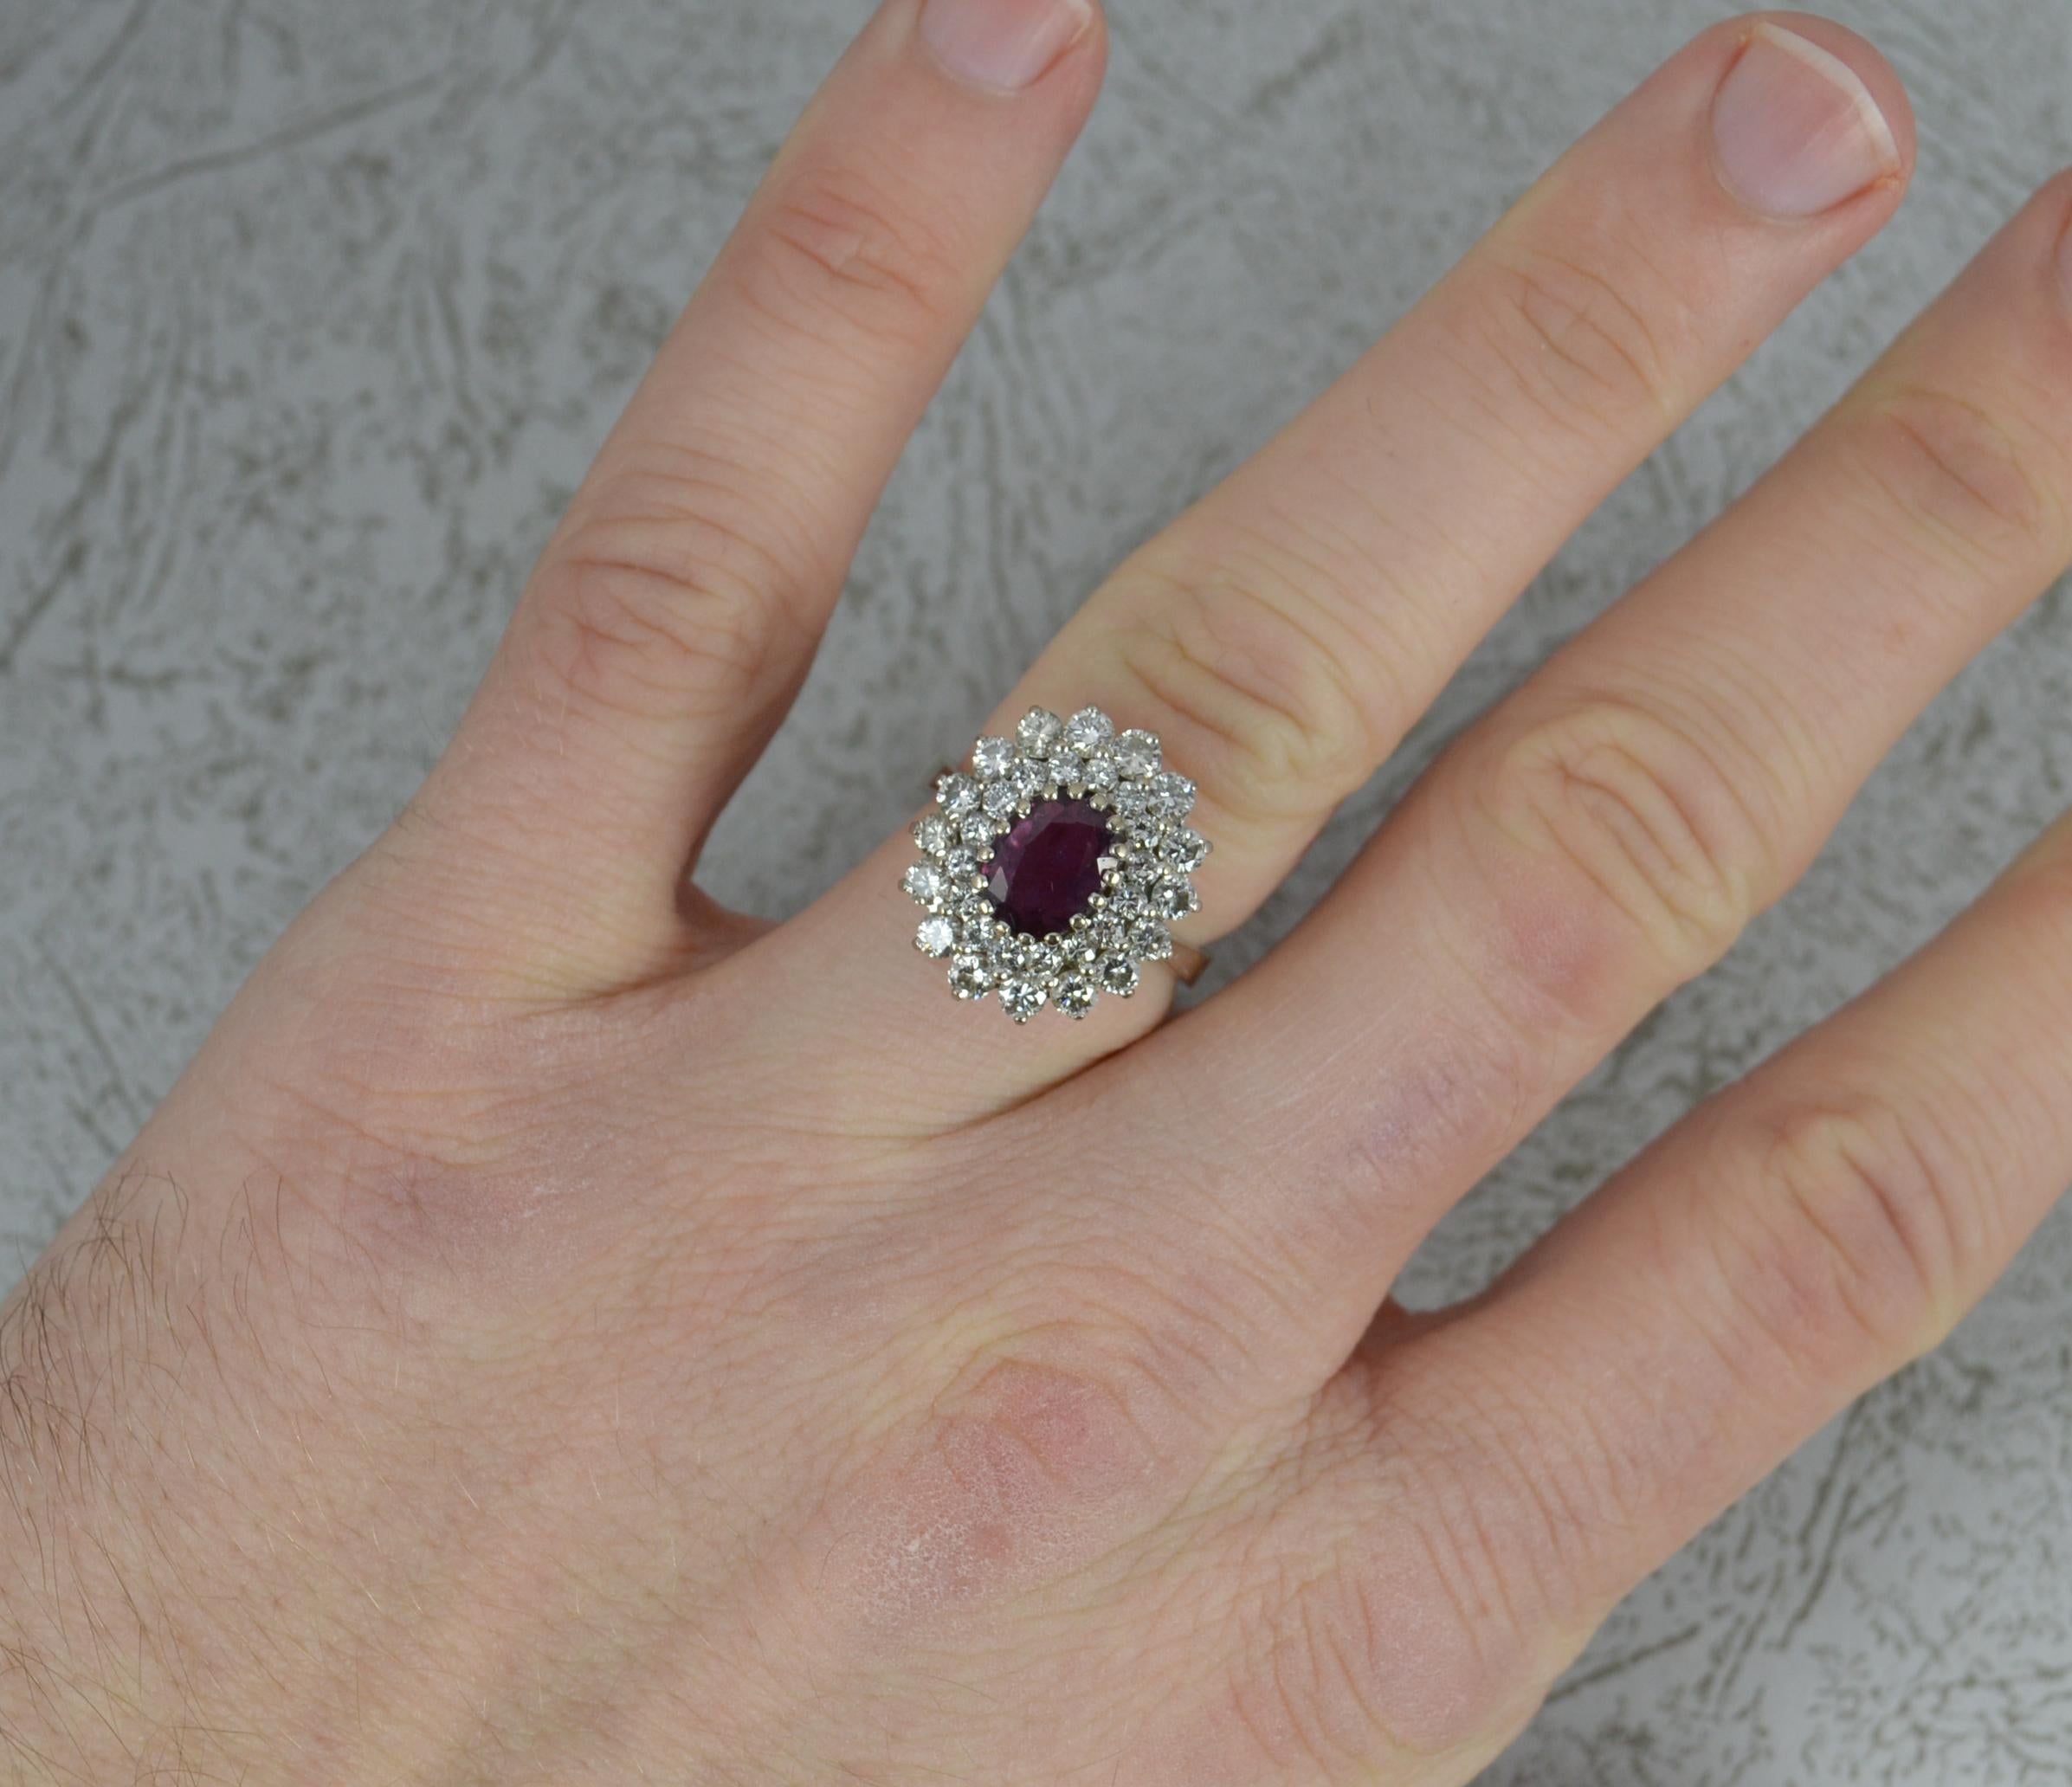 A stunning ladies cluster ring.
18 carat white gold example.
Designed with a good quality oval cut ruby to centre in multi claw setting. 5.9mm x 8.1mm approx. Surrounding are two tiers of sixteen natural, round brilliant cut diamonds. Vs1 clarity,